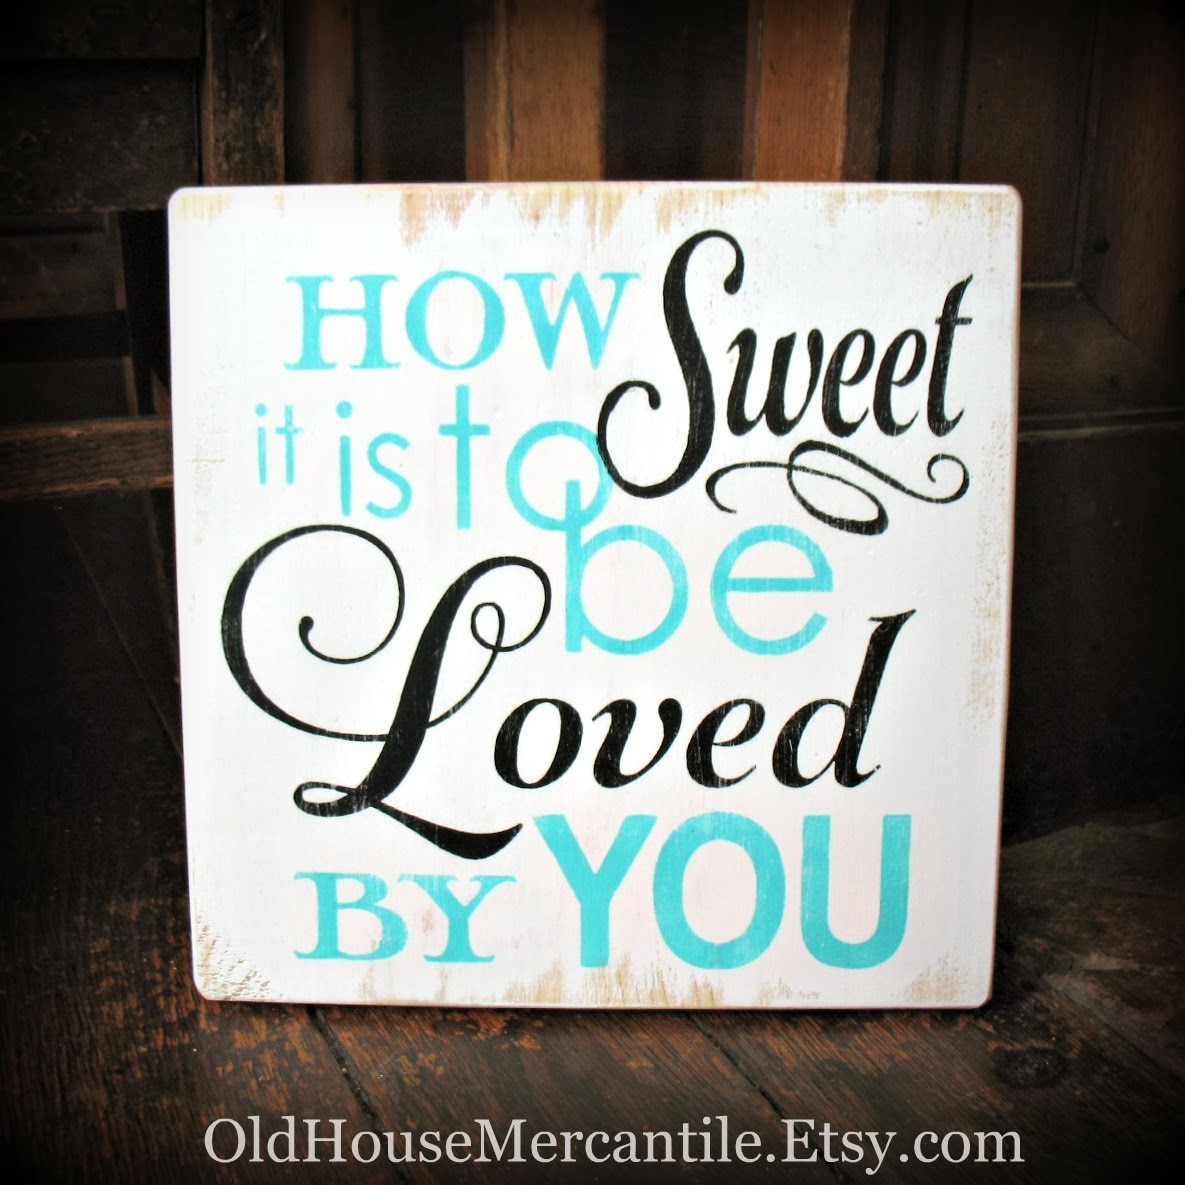 https://www.etsy.com/listing/176305144/how-sweet-it-is-to-be-loved-by-you?